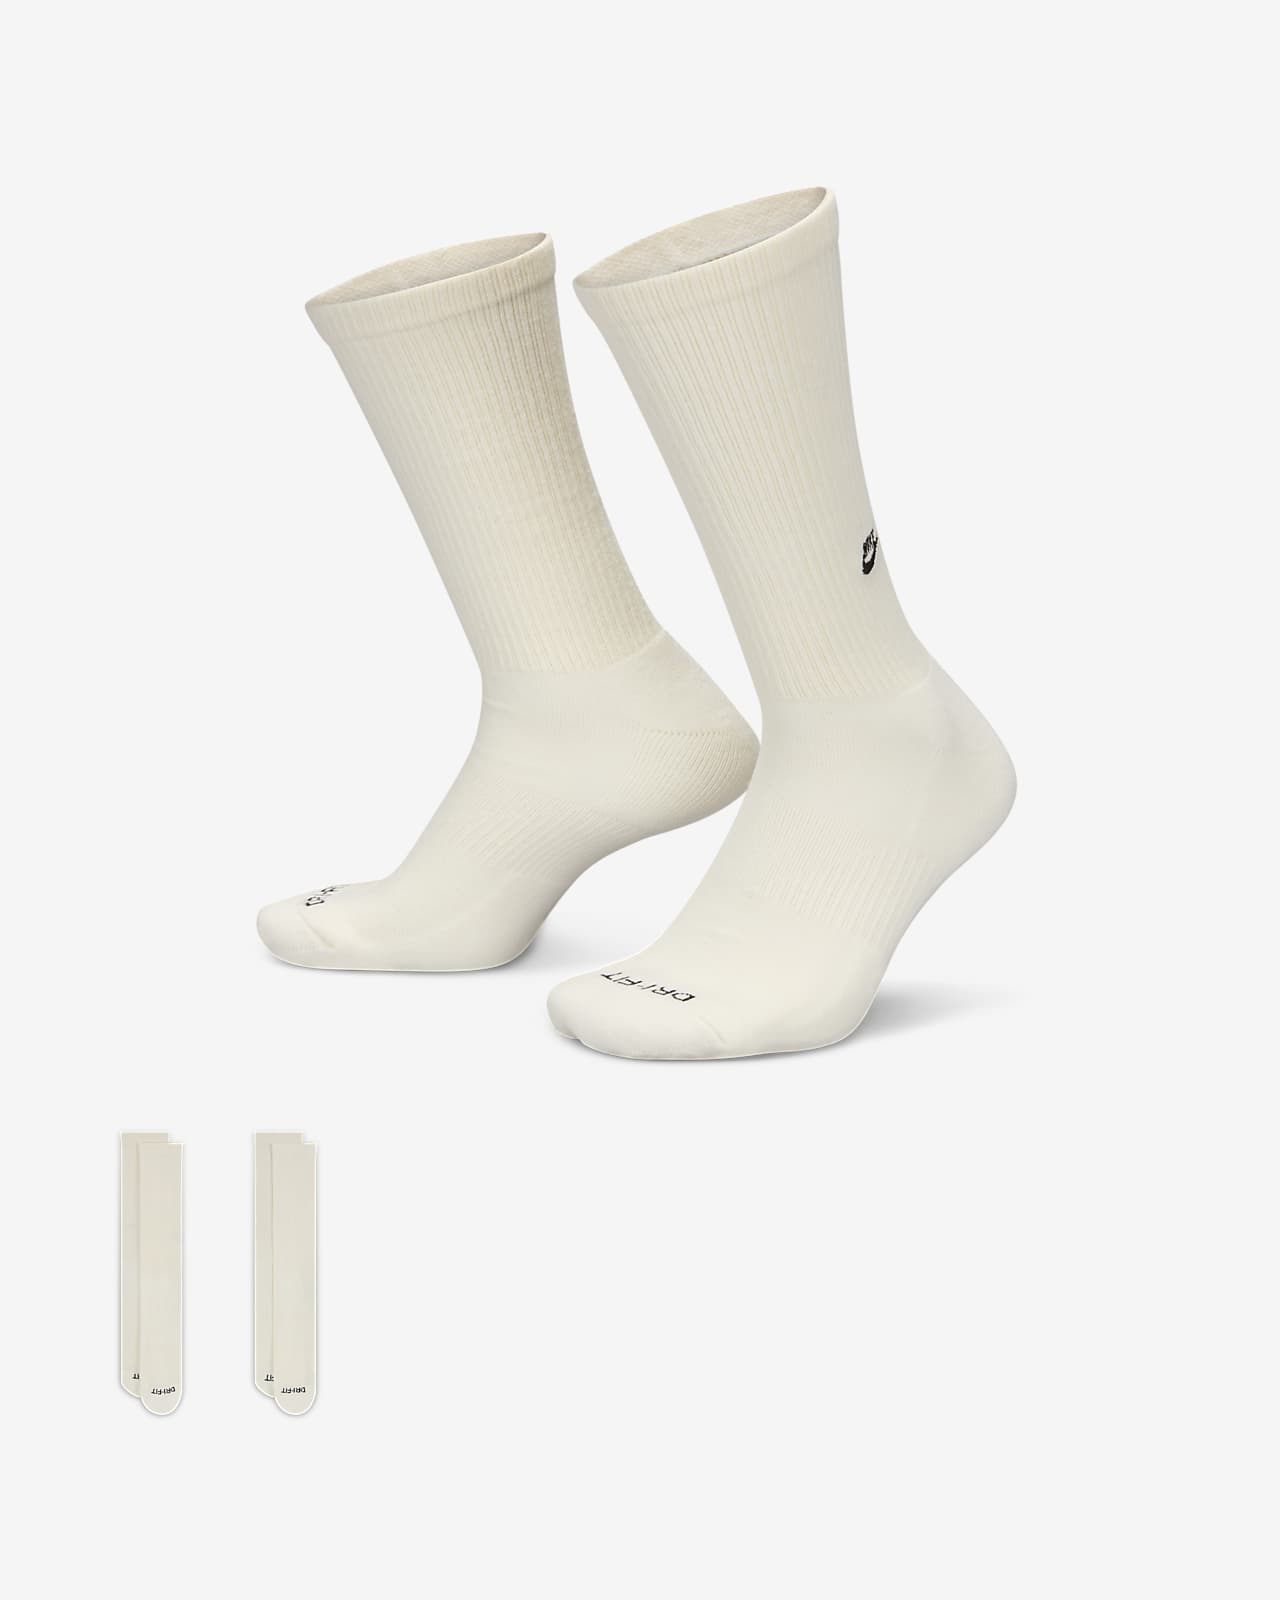 Chaussettes mi-mollet Nike Everyday Cushioned (2 paires)